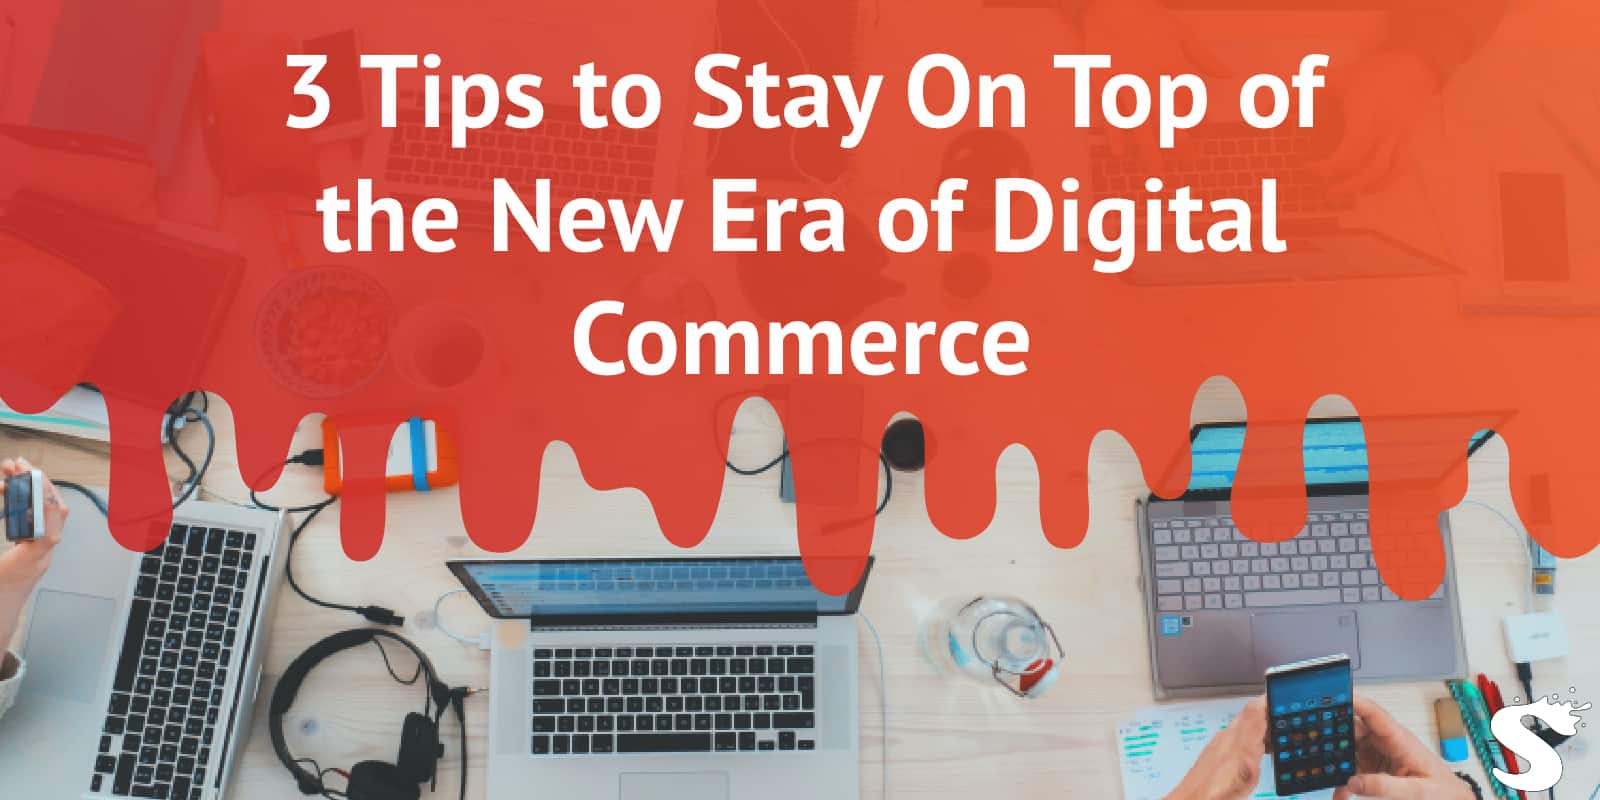 3 Tips to Stay On Top of the New Era of Digital Commerce